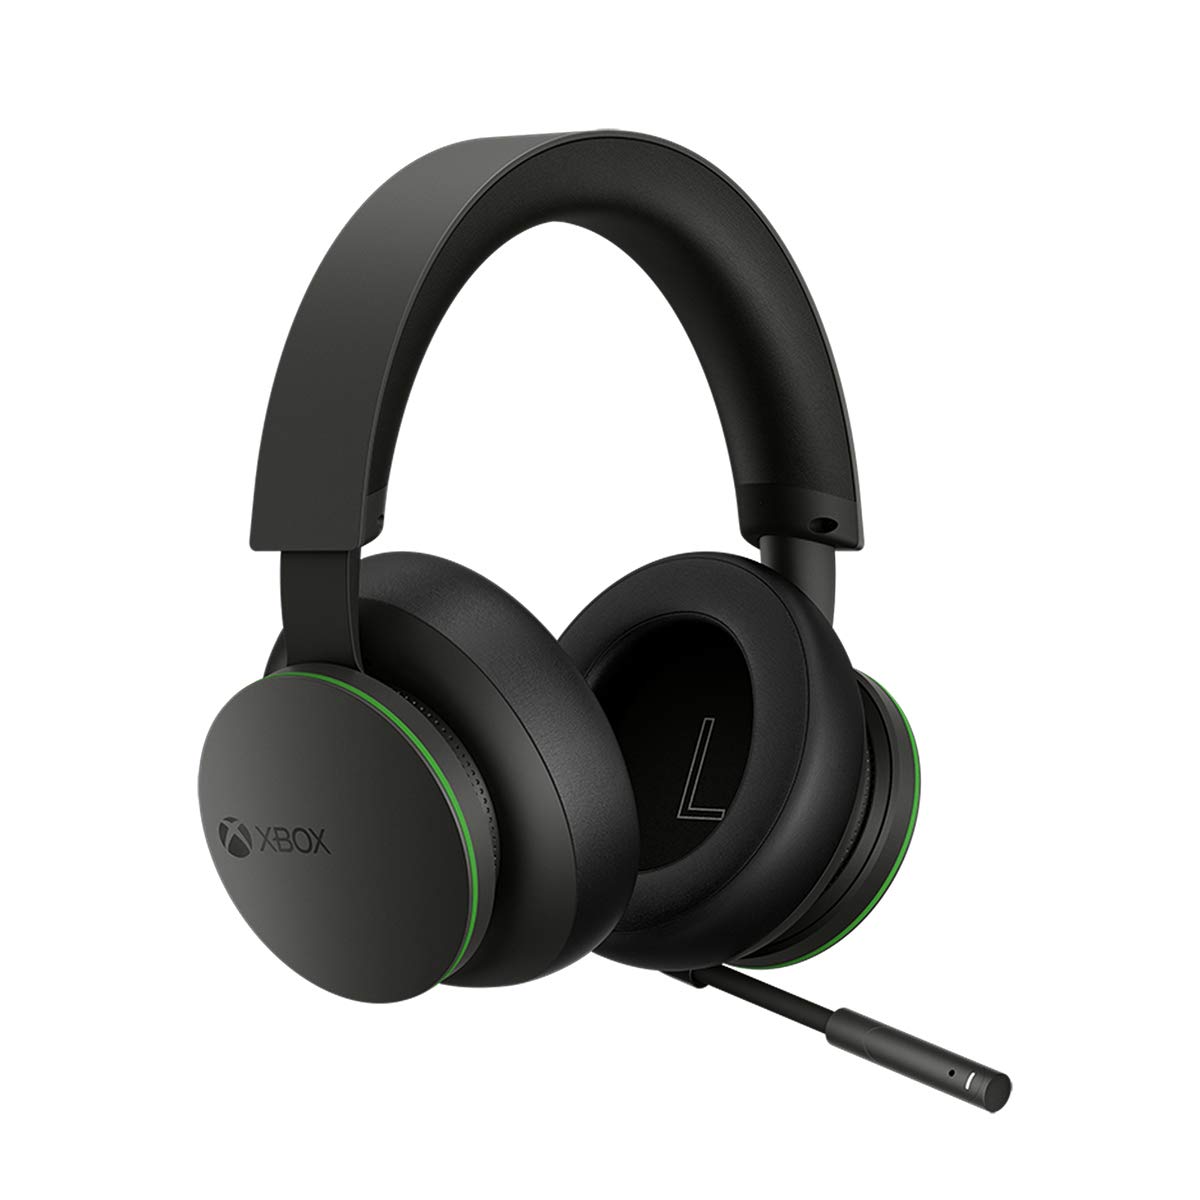 Xbox Wireless Headset for Xbox Series X|S, Xbox One, and Windows 10 Devices $85 + Free Shipping